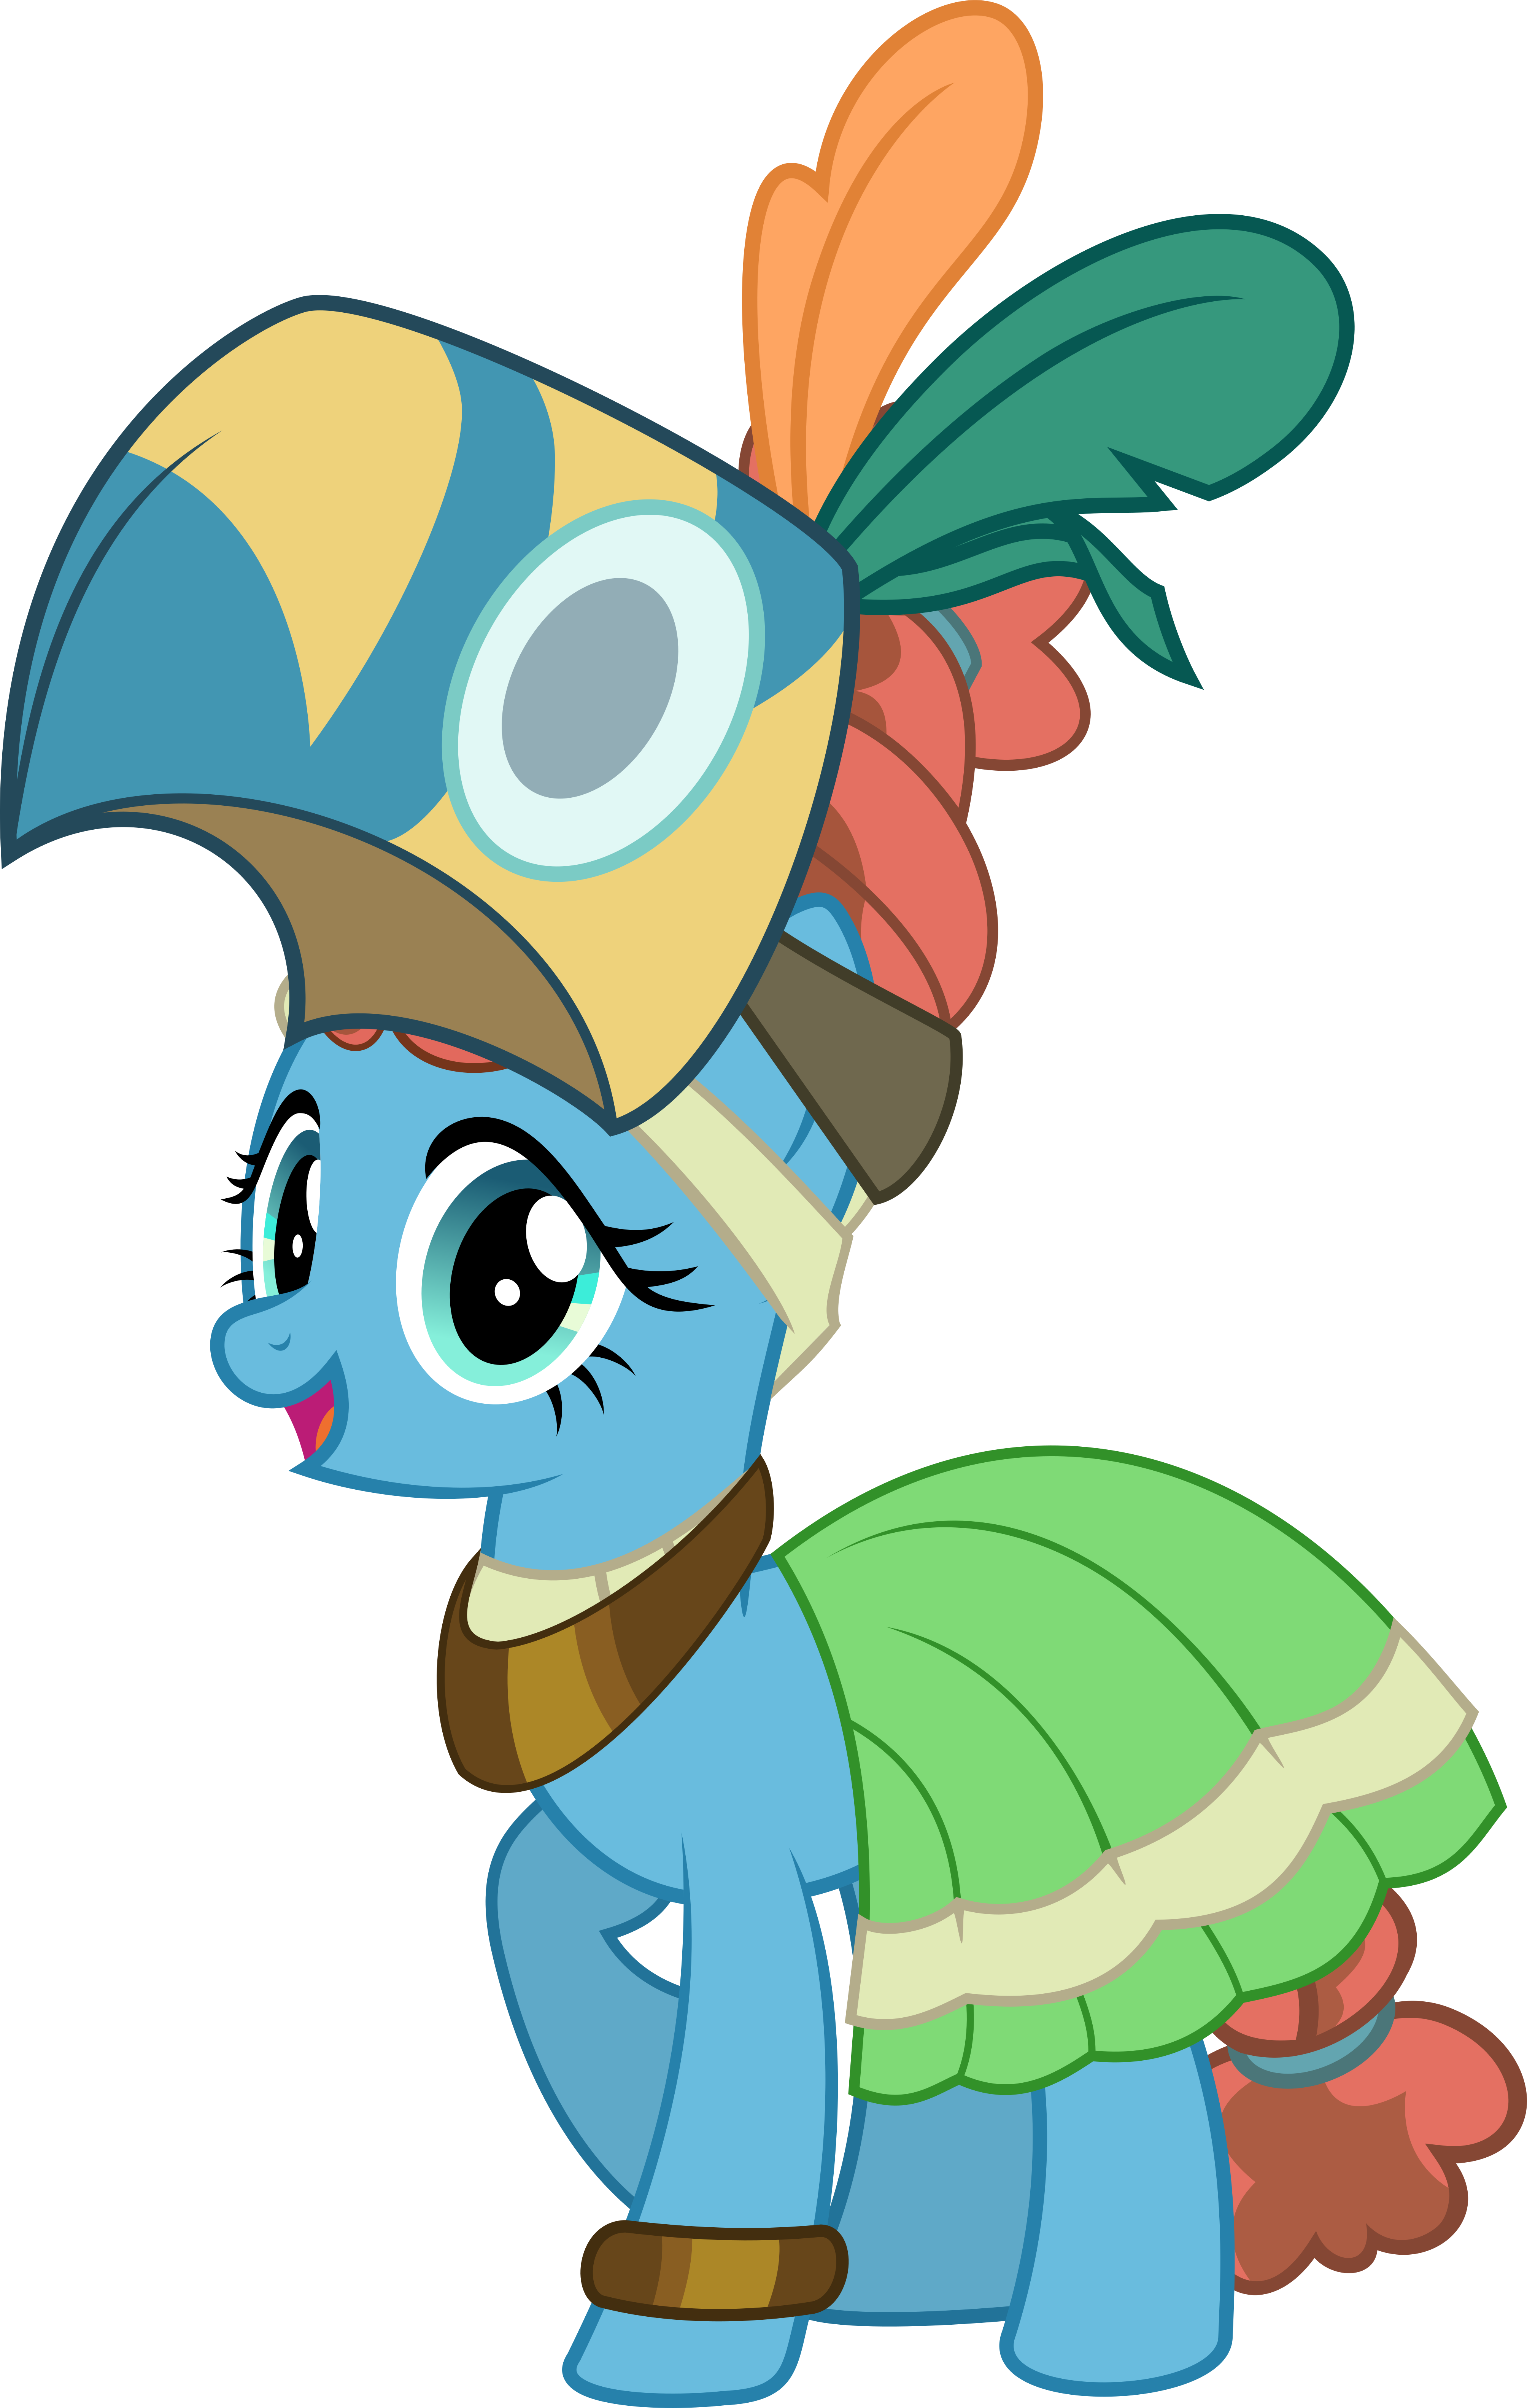 Mlp vector mage meadowbrook 3 by jhayarr23-dbs1zpp.png